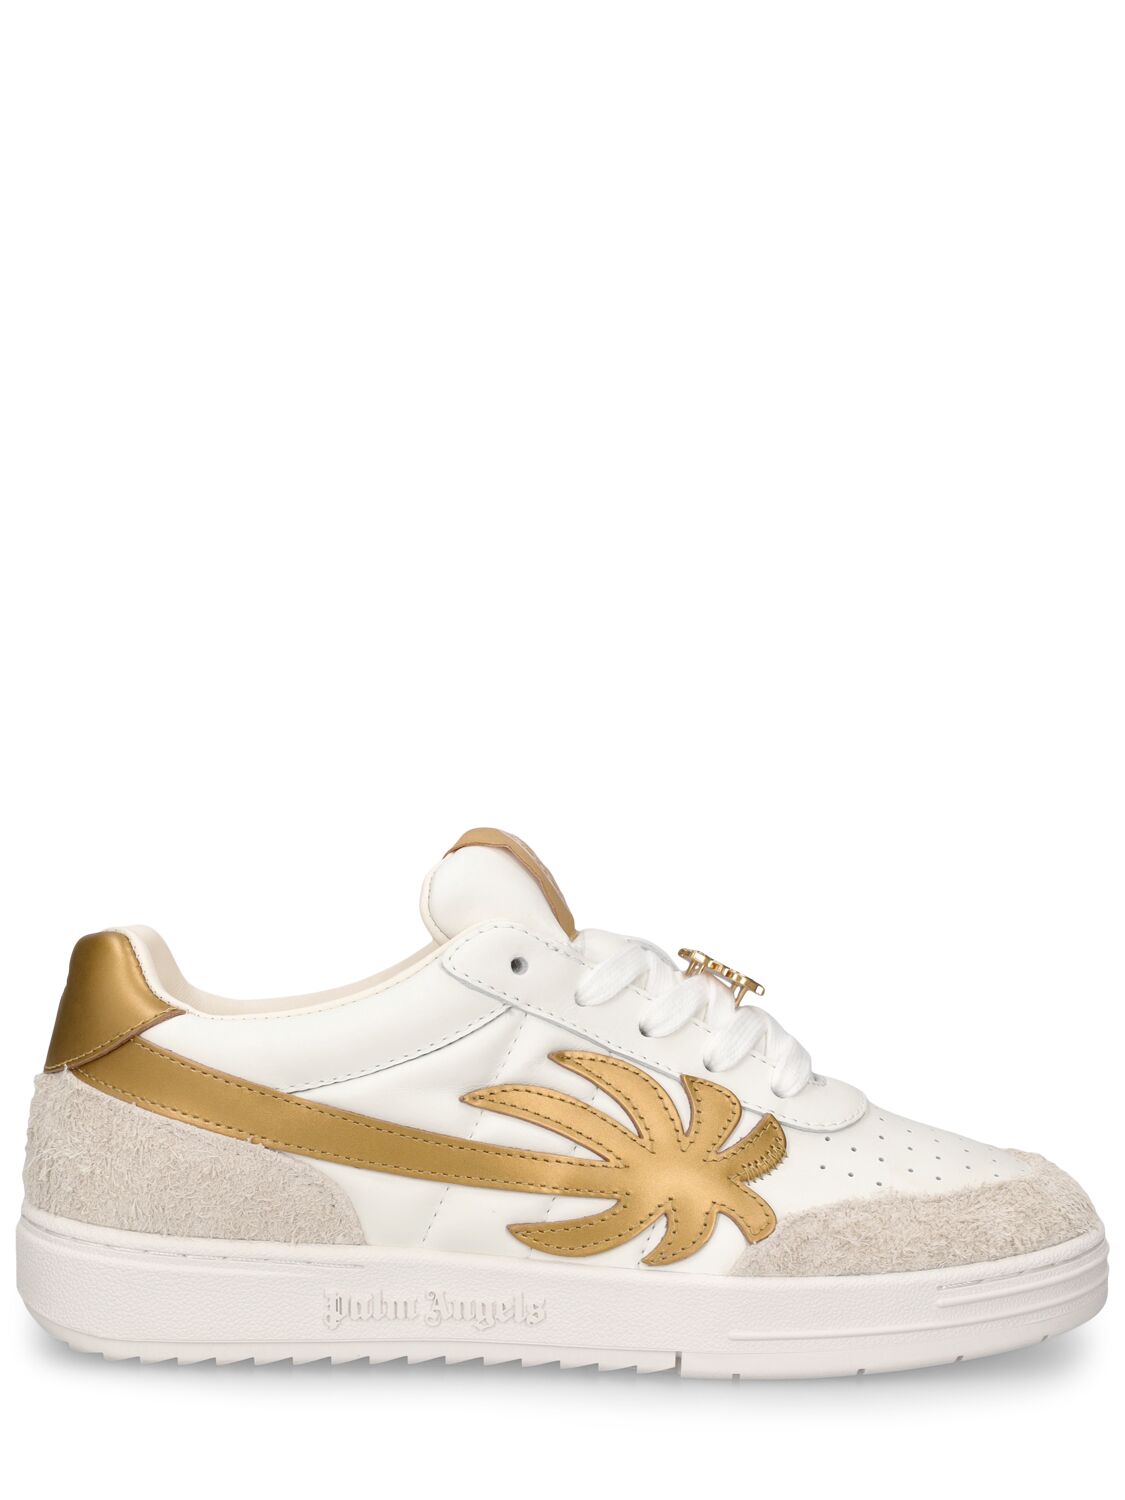 Image of Palm Beach University Leather Sneakers